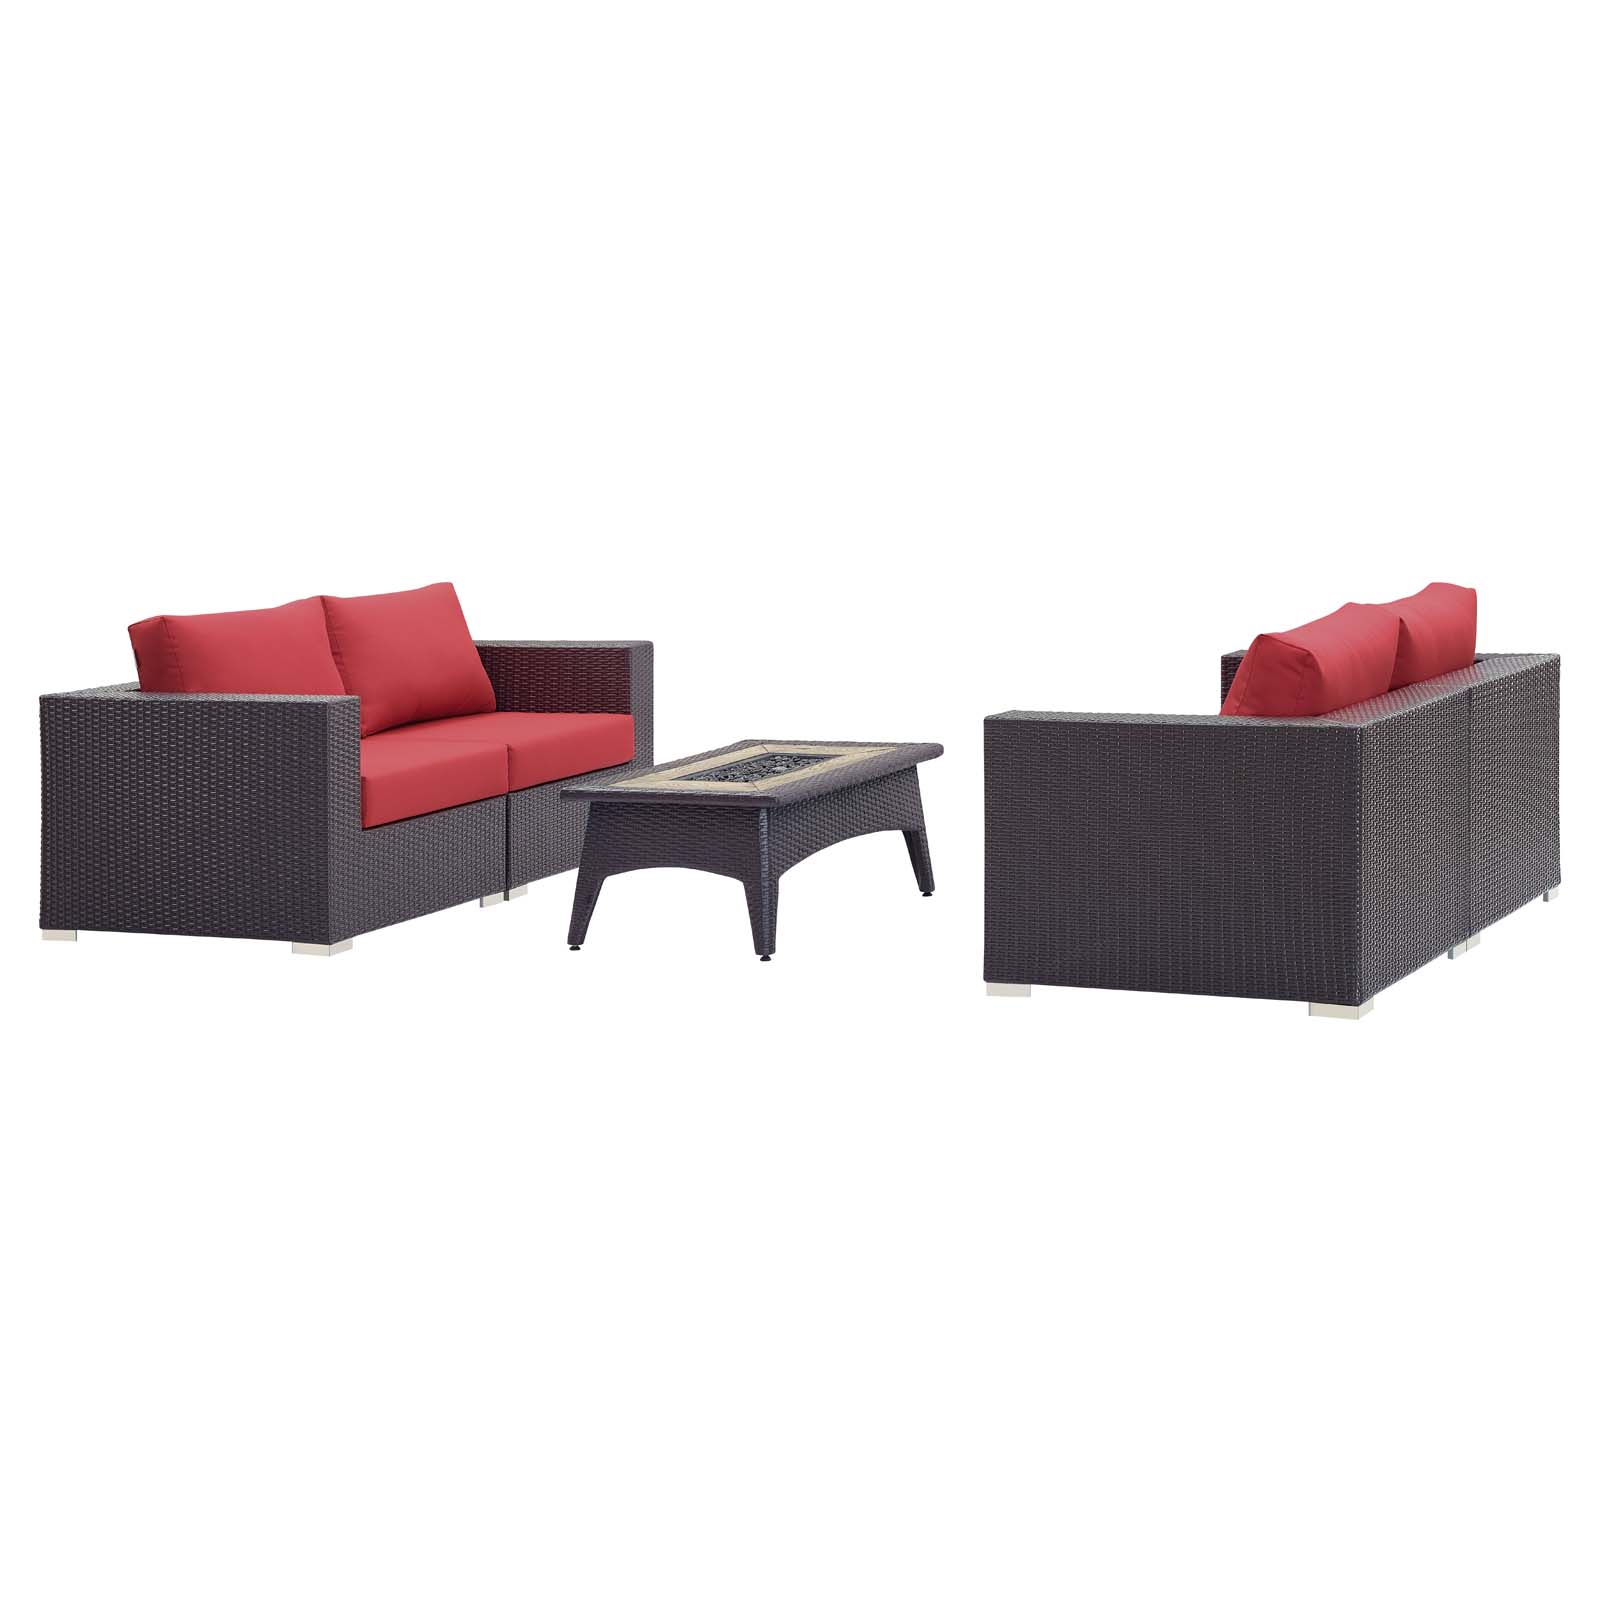 Contemporary Modern Urban Designer Outdoor Patio Balcony Garden Furniture Lounge Sofa, Chair and Coffee Table Fire Pit Set, Fabric Rattan Wicker, Red - image 3 of 8